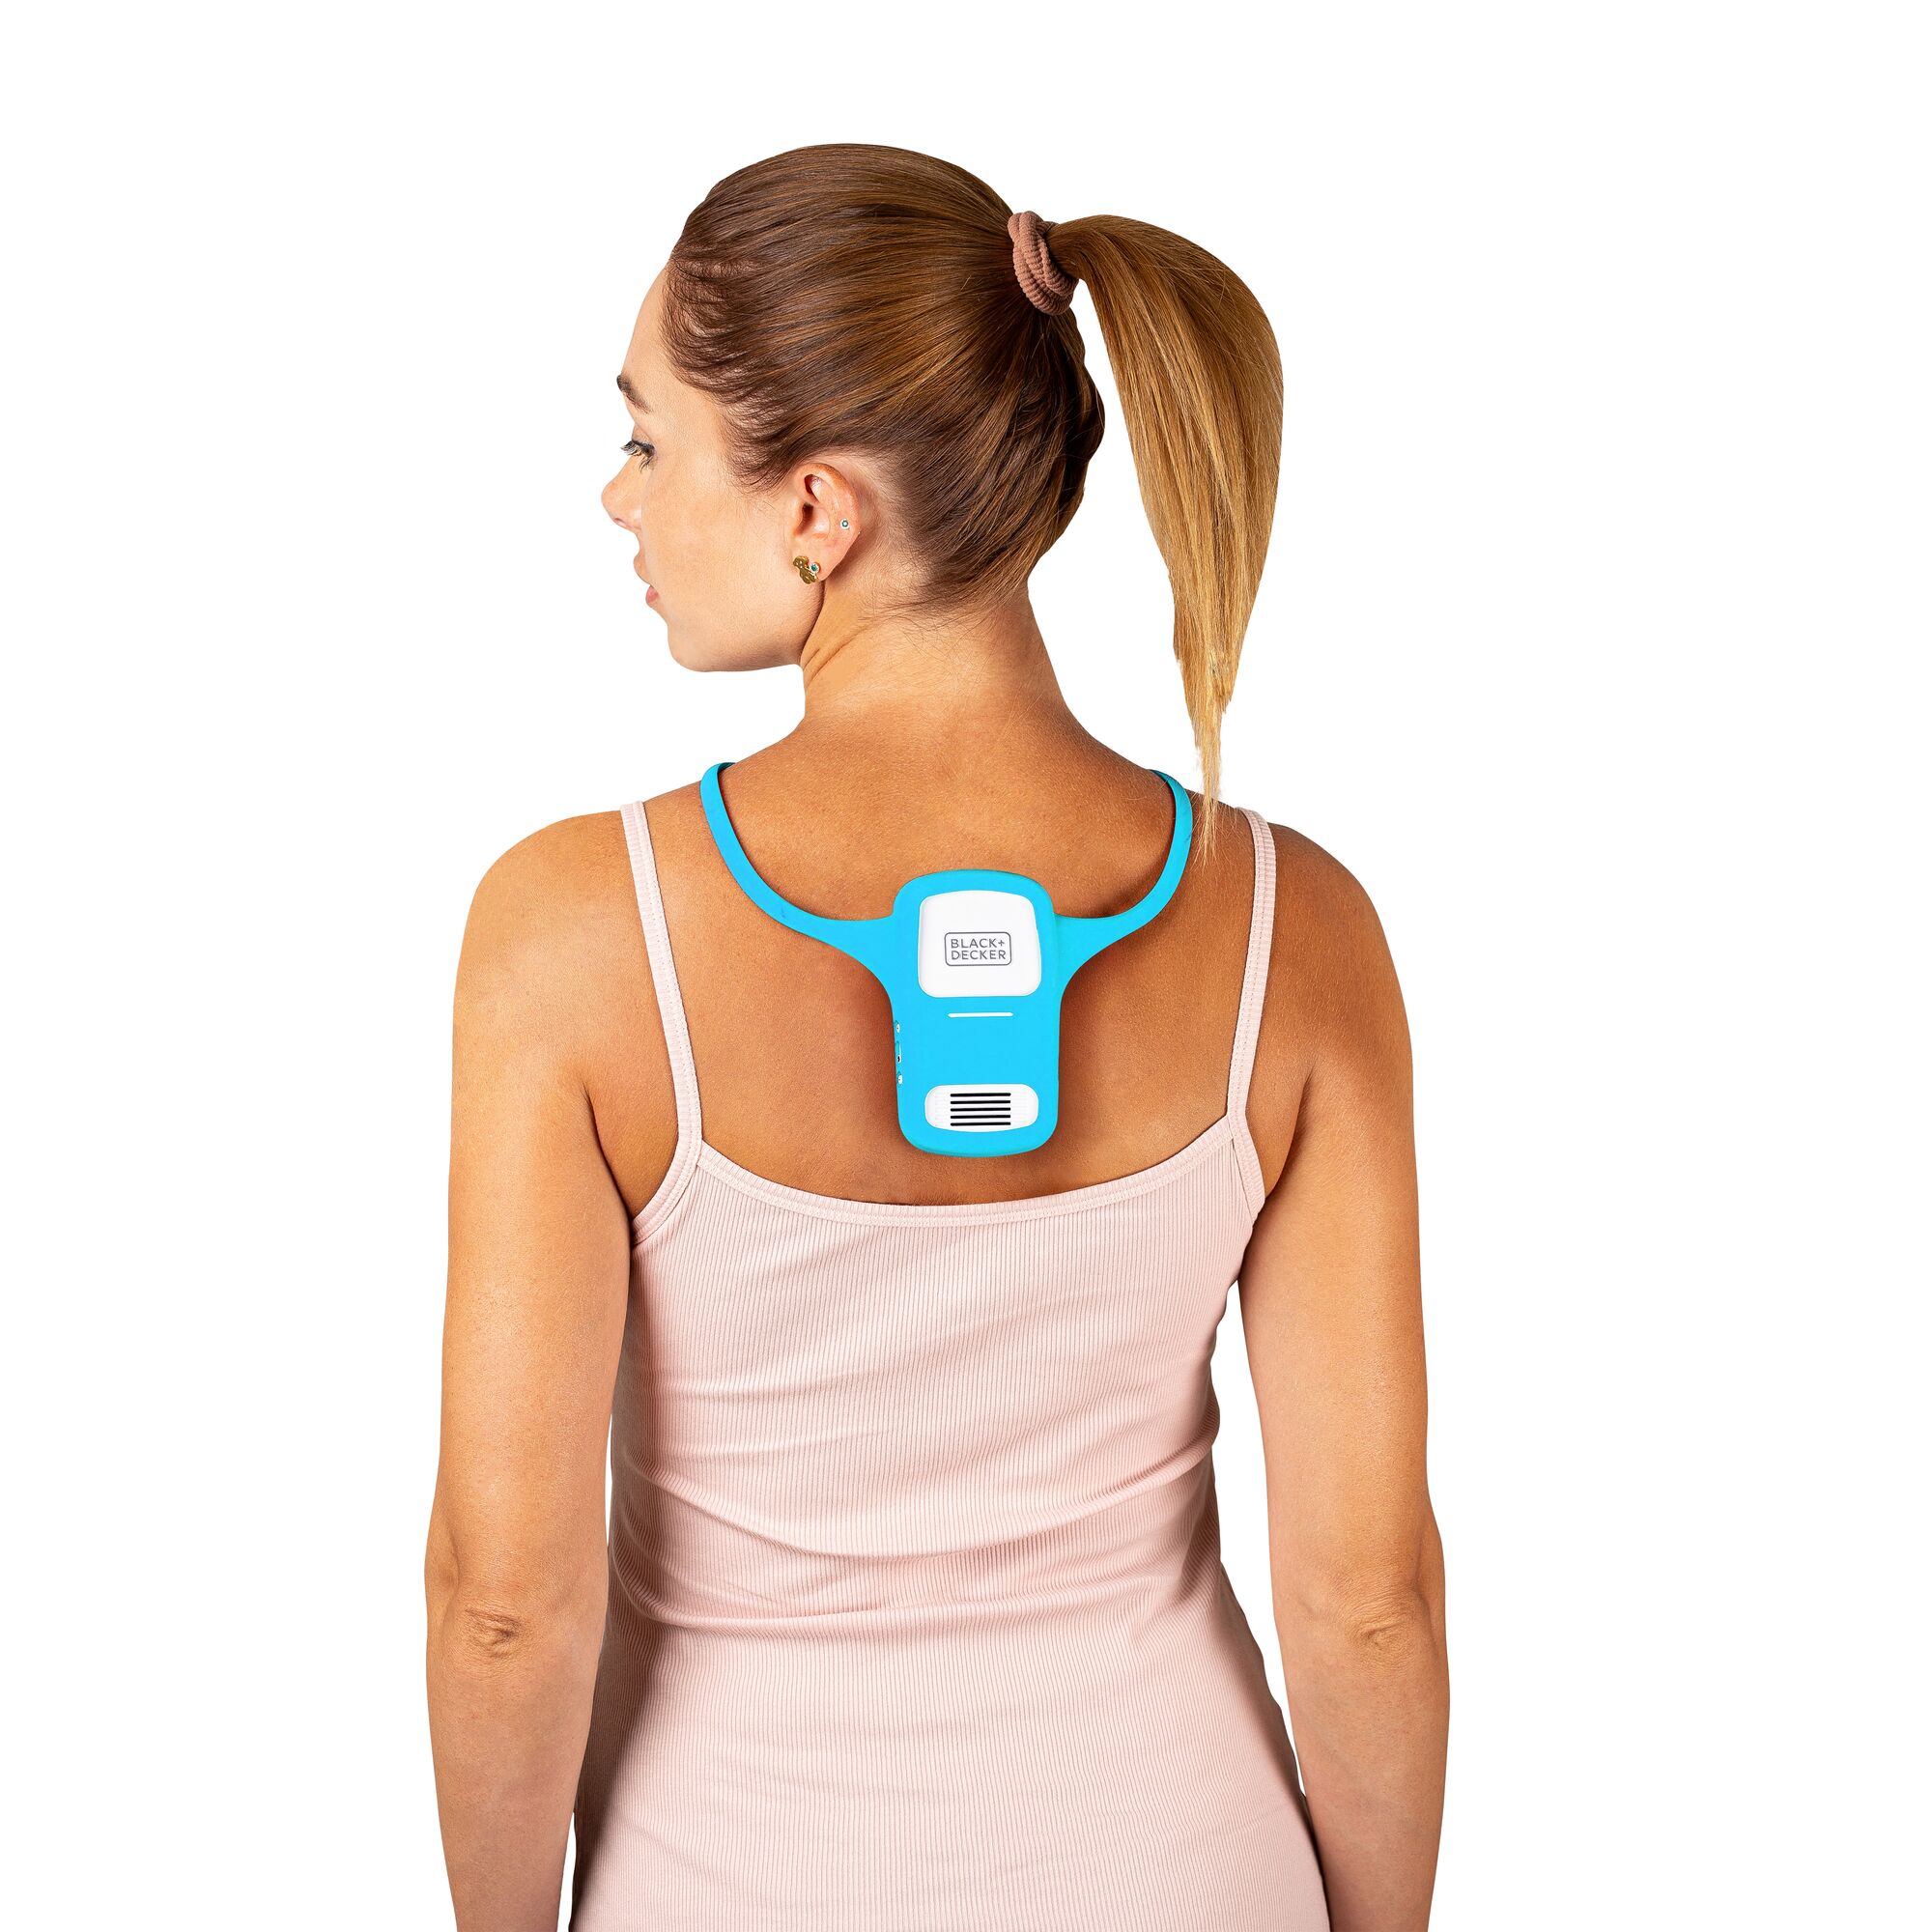 rear view of the comfortpak™ device in the breeze blue 360° lanyard worn around the back of a woman's neck